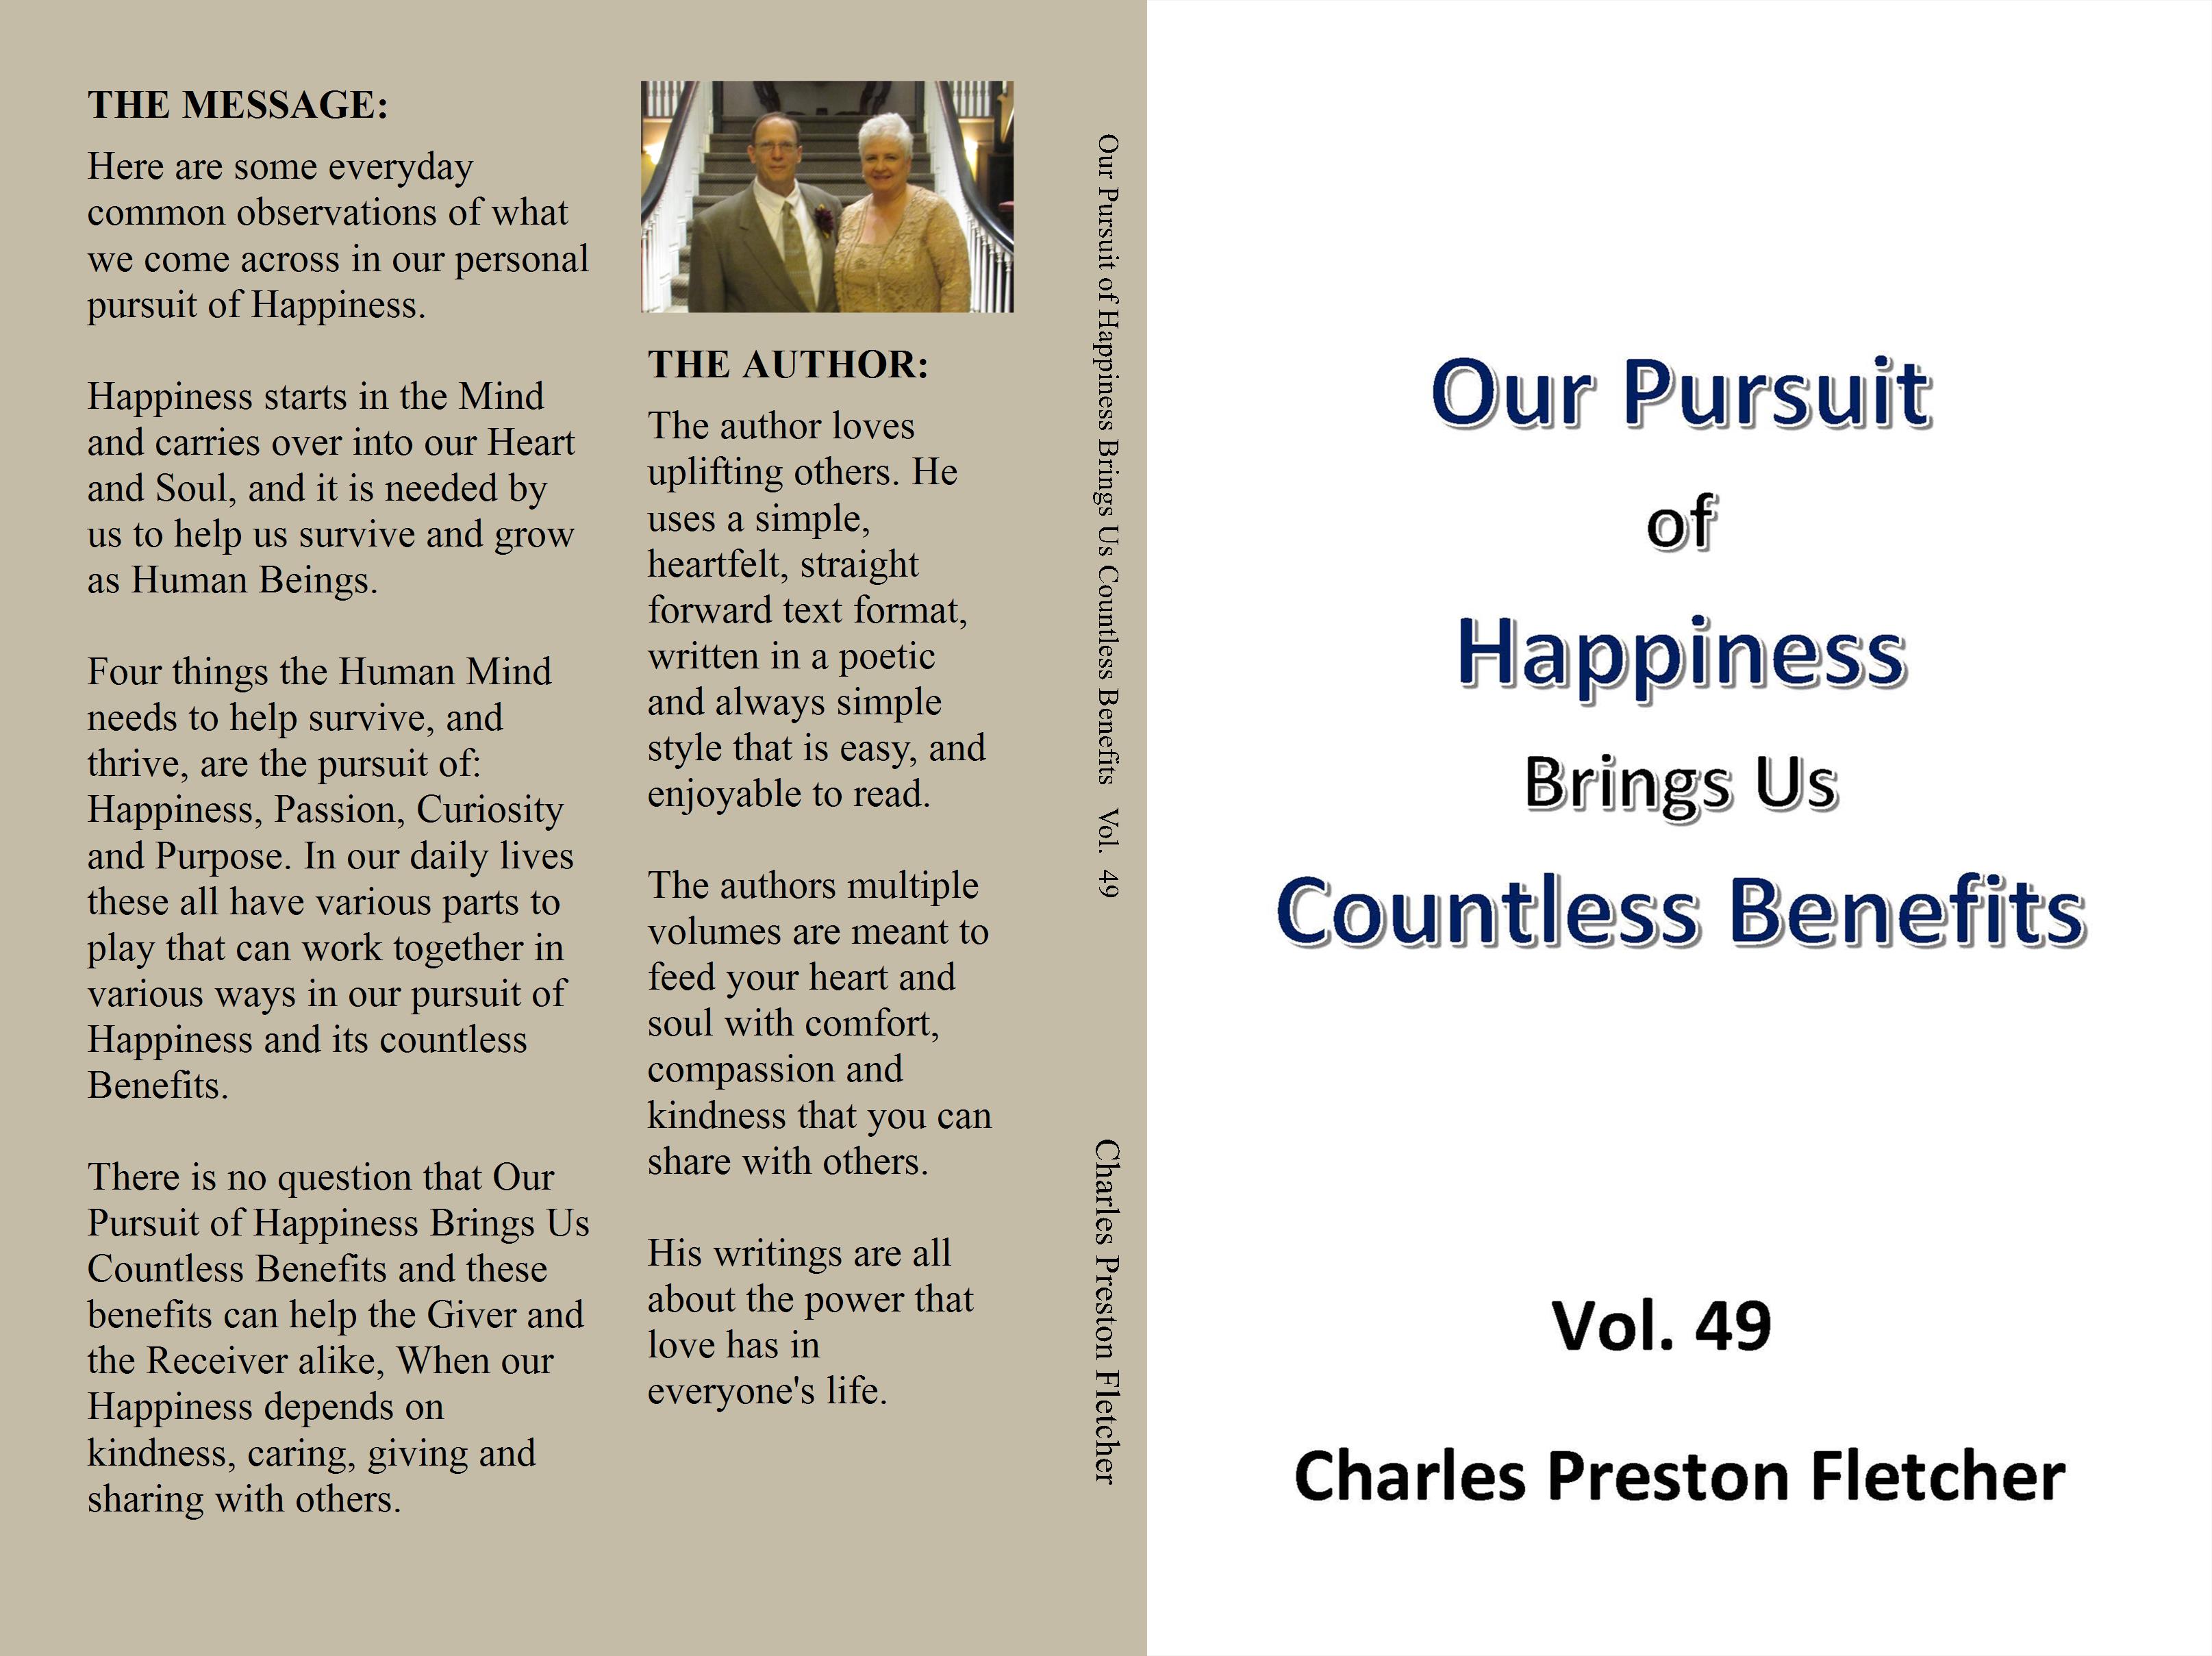 Our Pursuit of Happiness Brings Us Countless Benefits  Vol. 49 cover image